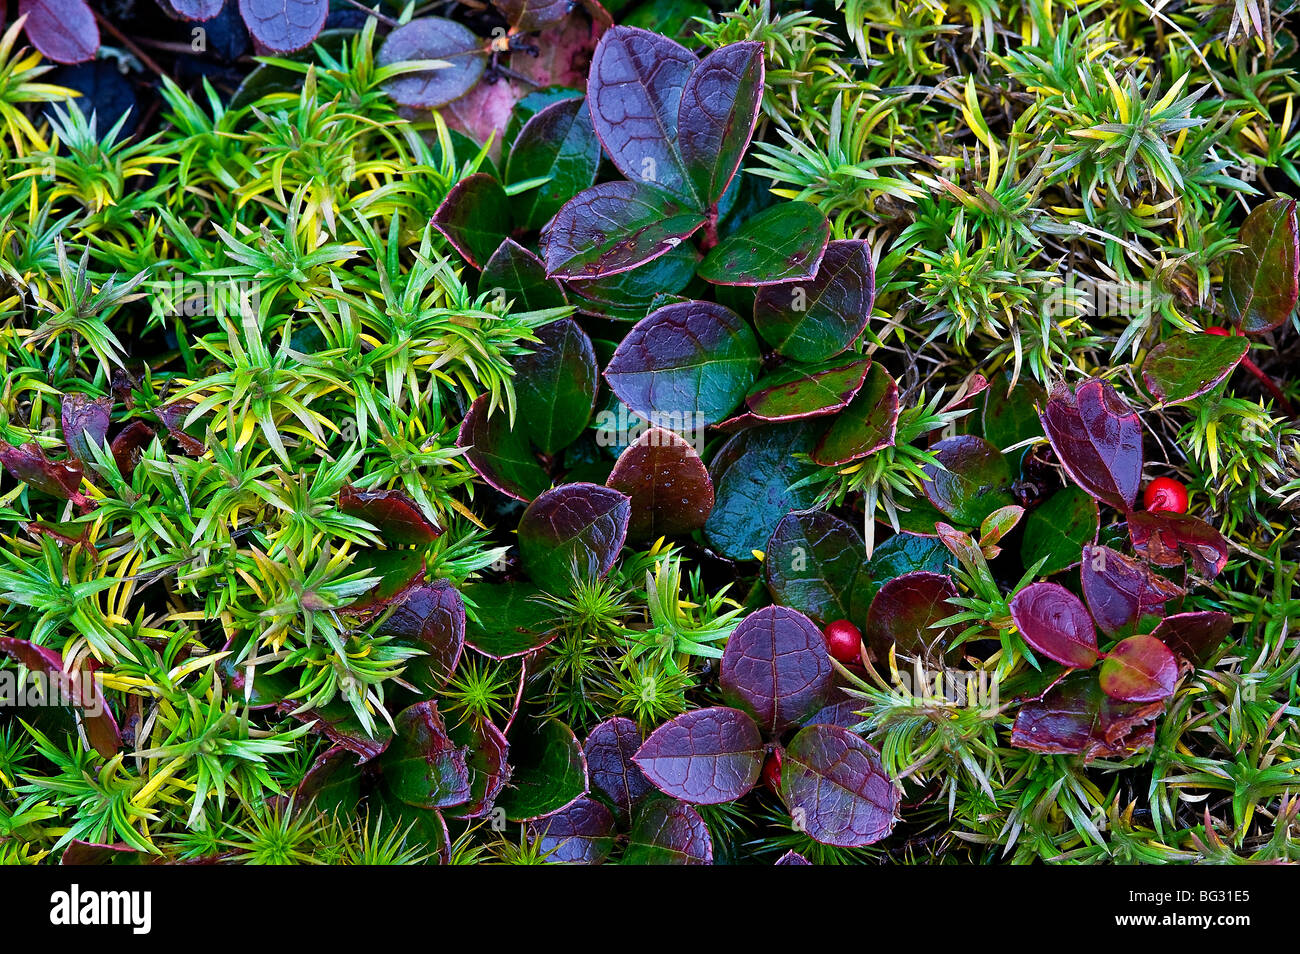 Colorful autumn ground cover plants. Stock Photo